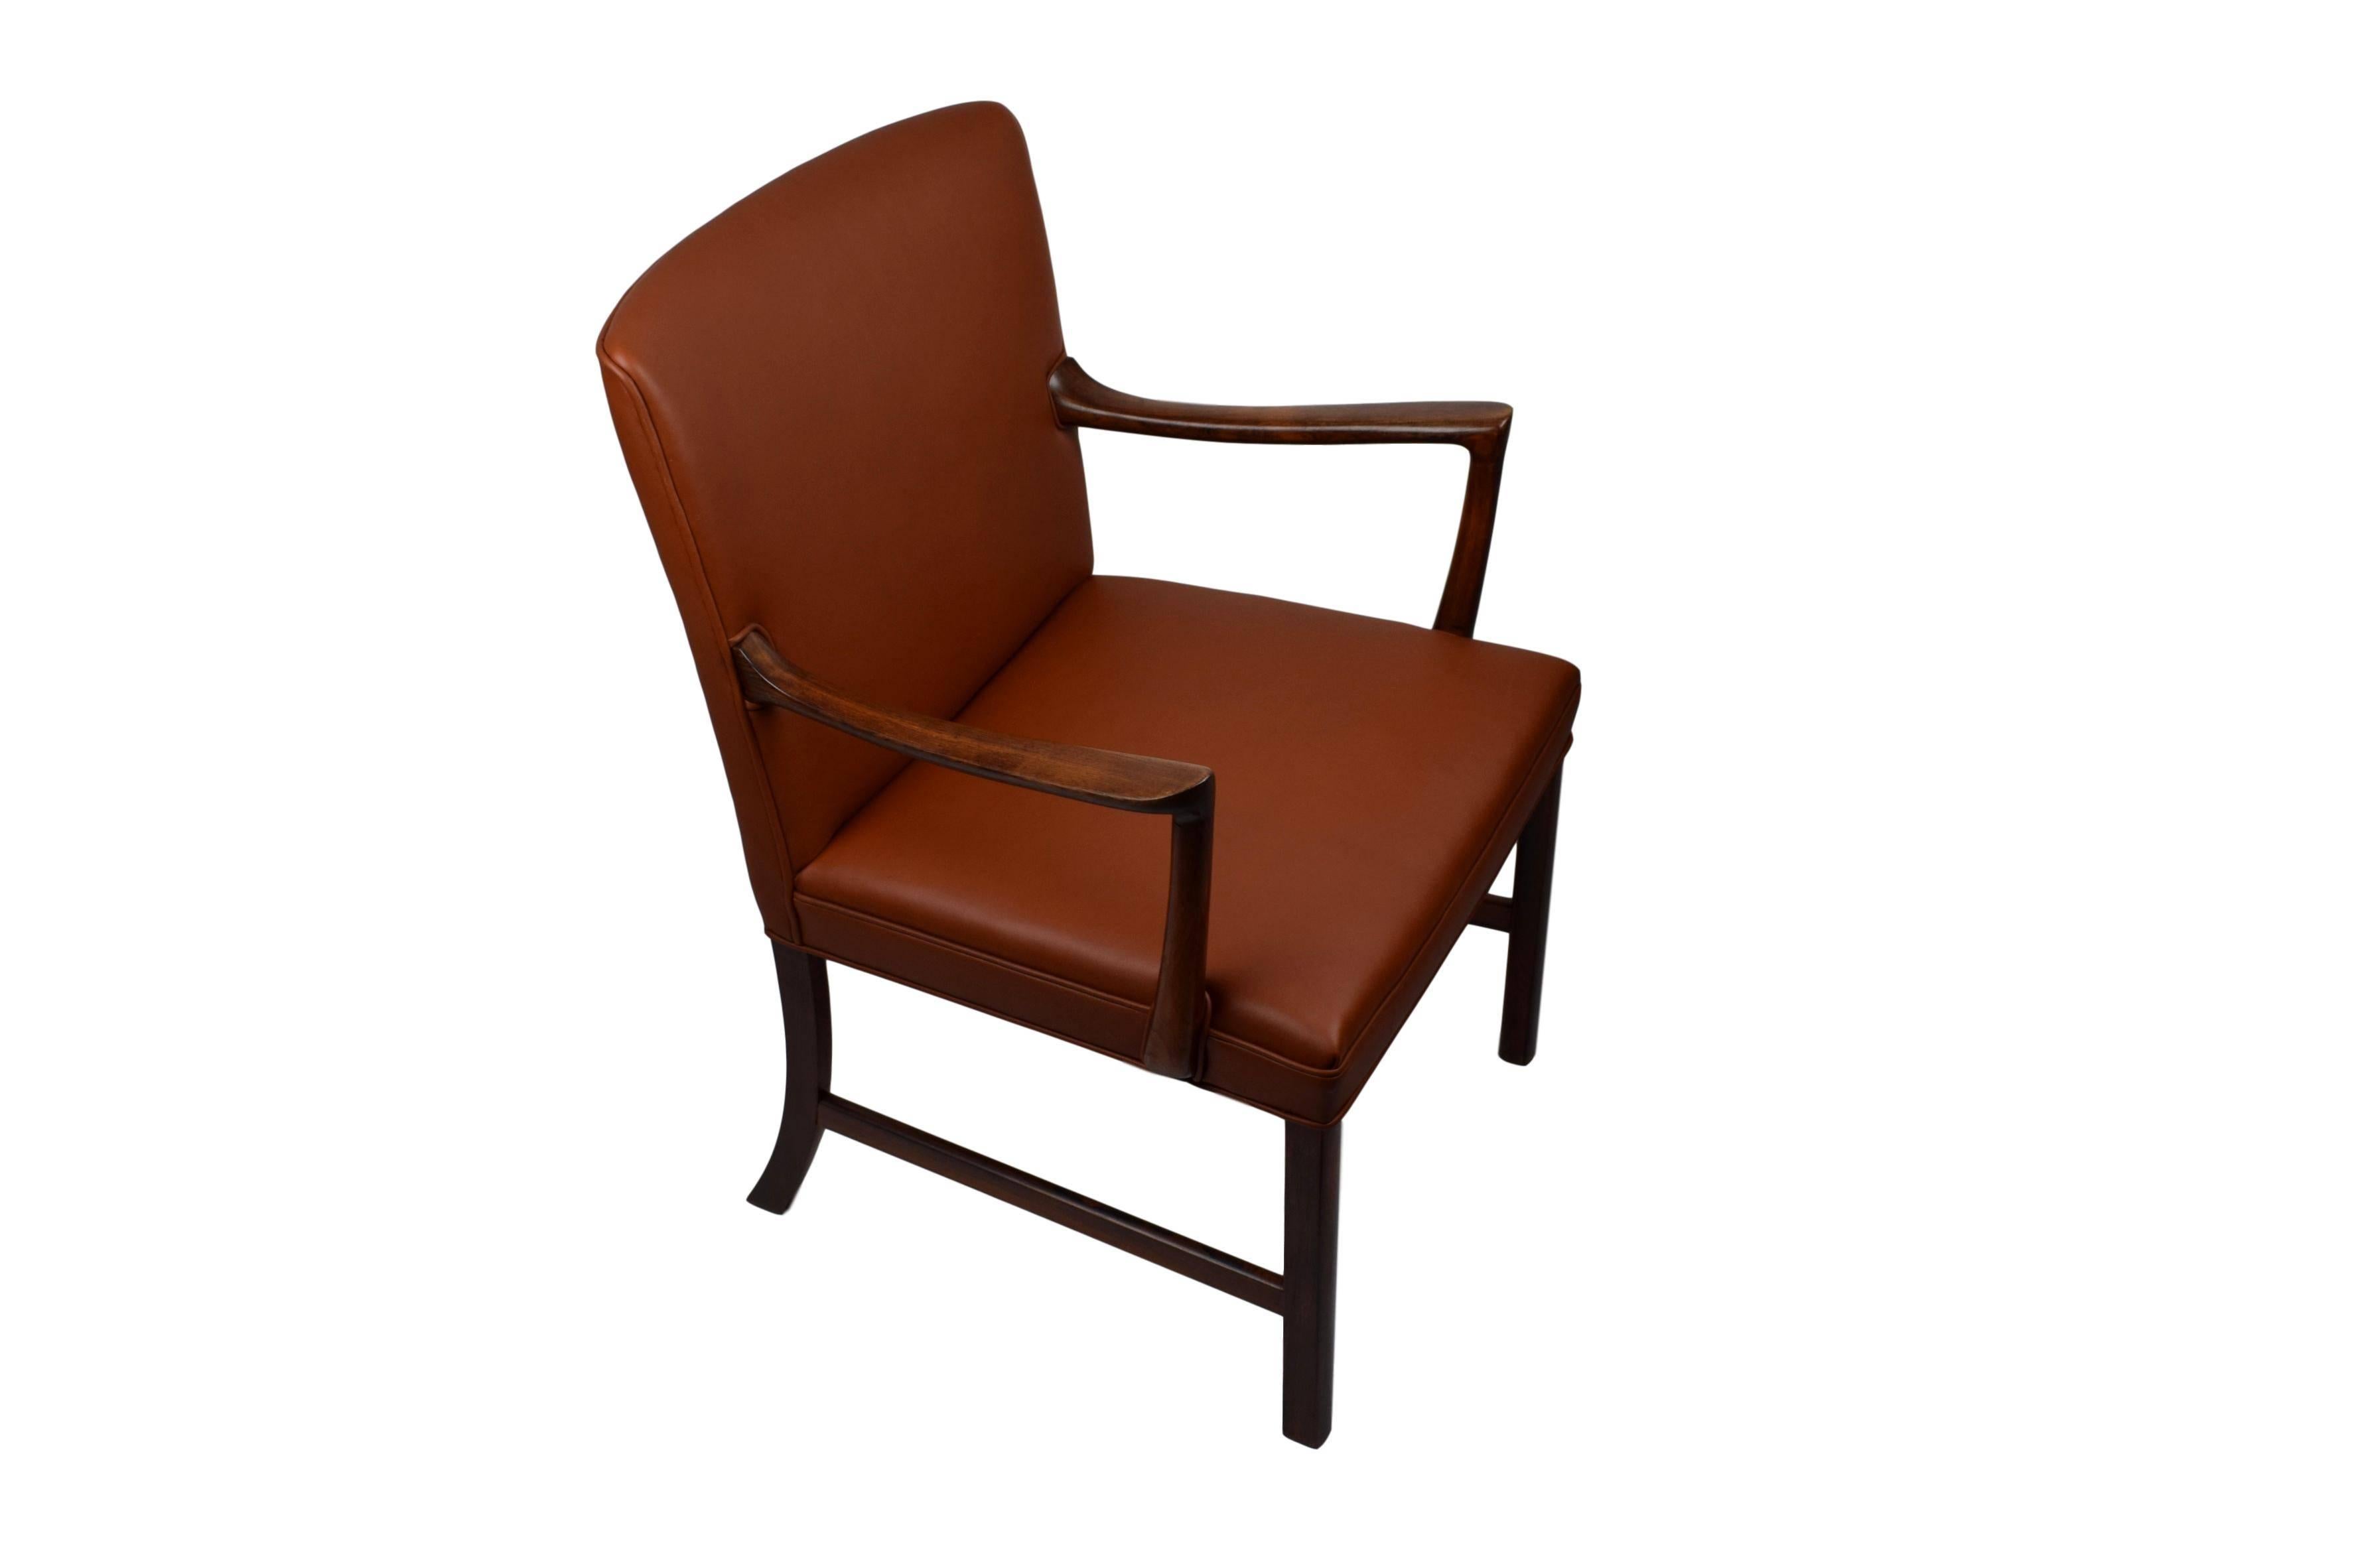 Midcentury Rosewood Armchair by Ole Wanscher, Upholstered with Aniline Leather In Good Condition For Sale In Denmark, DK